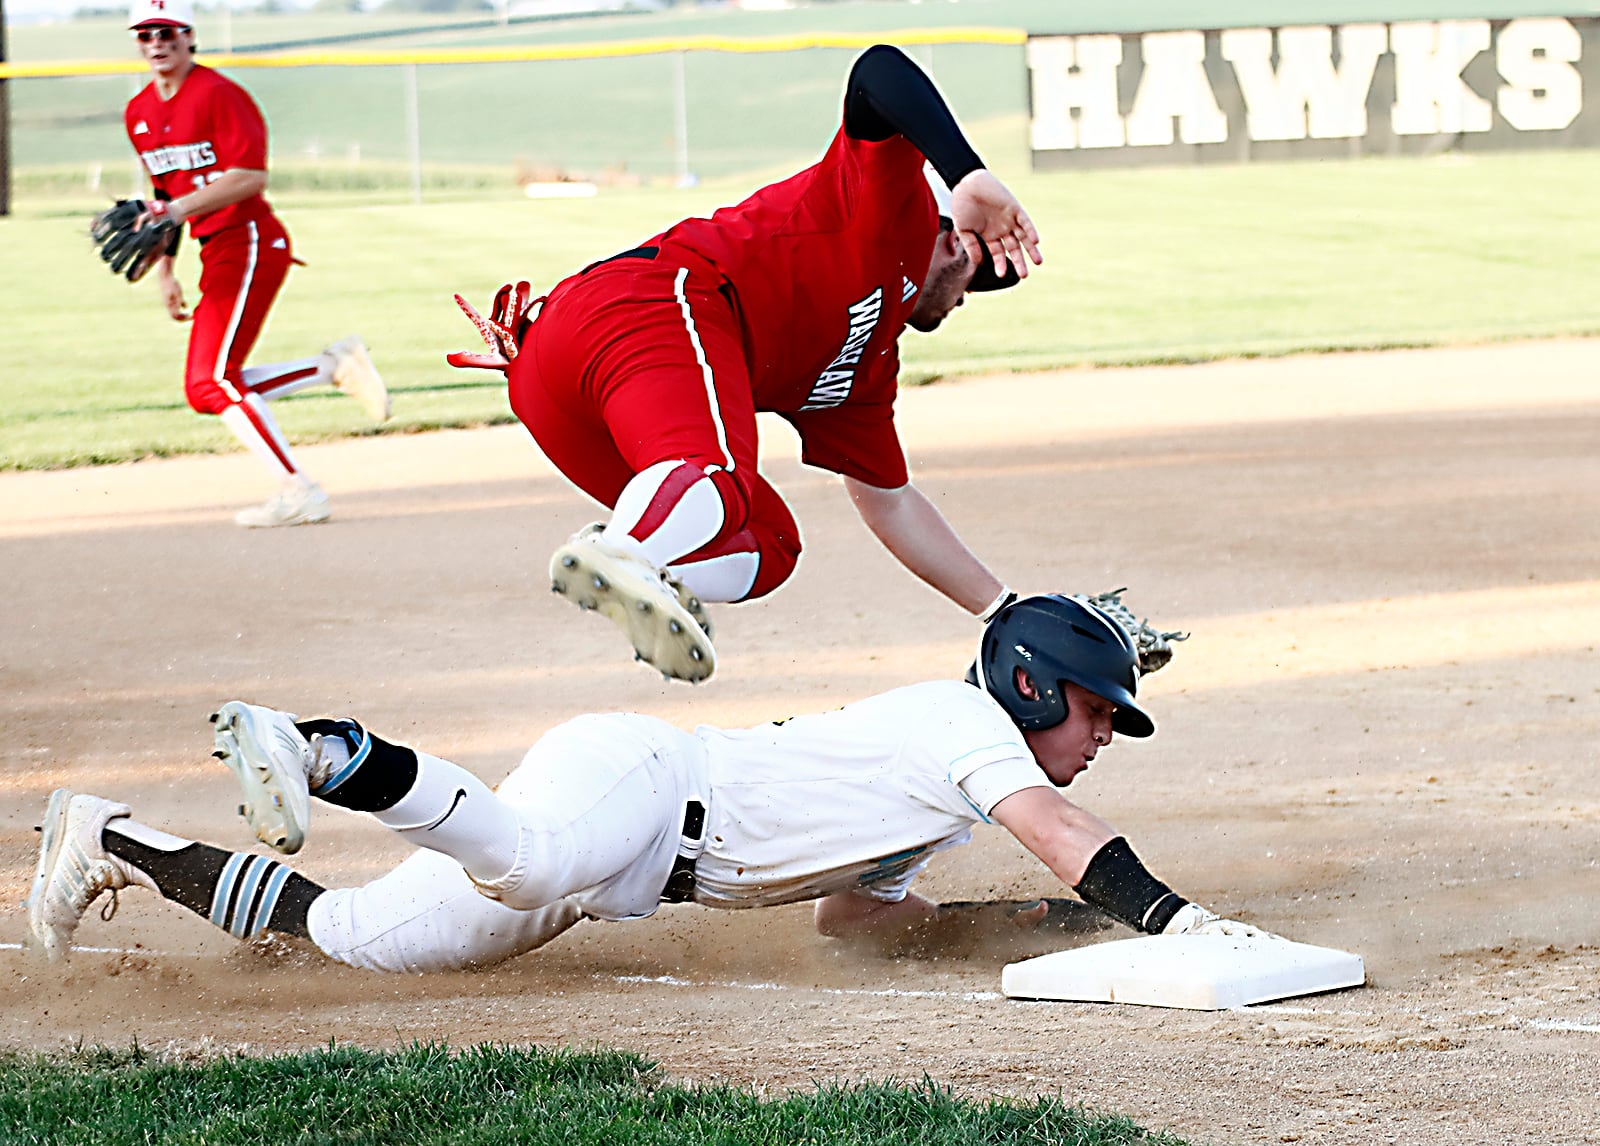 Sieck leads L-S baseball to third straight district championship